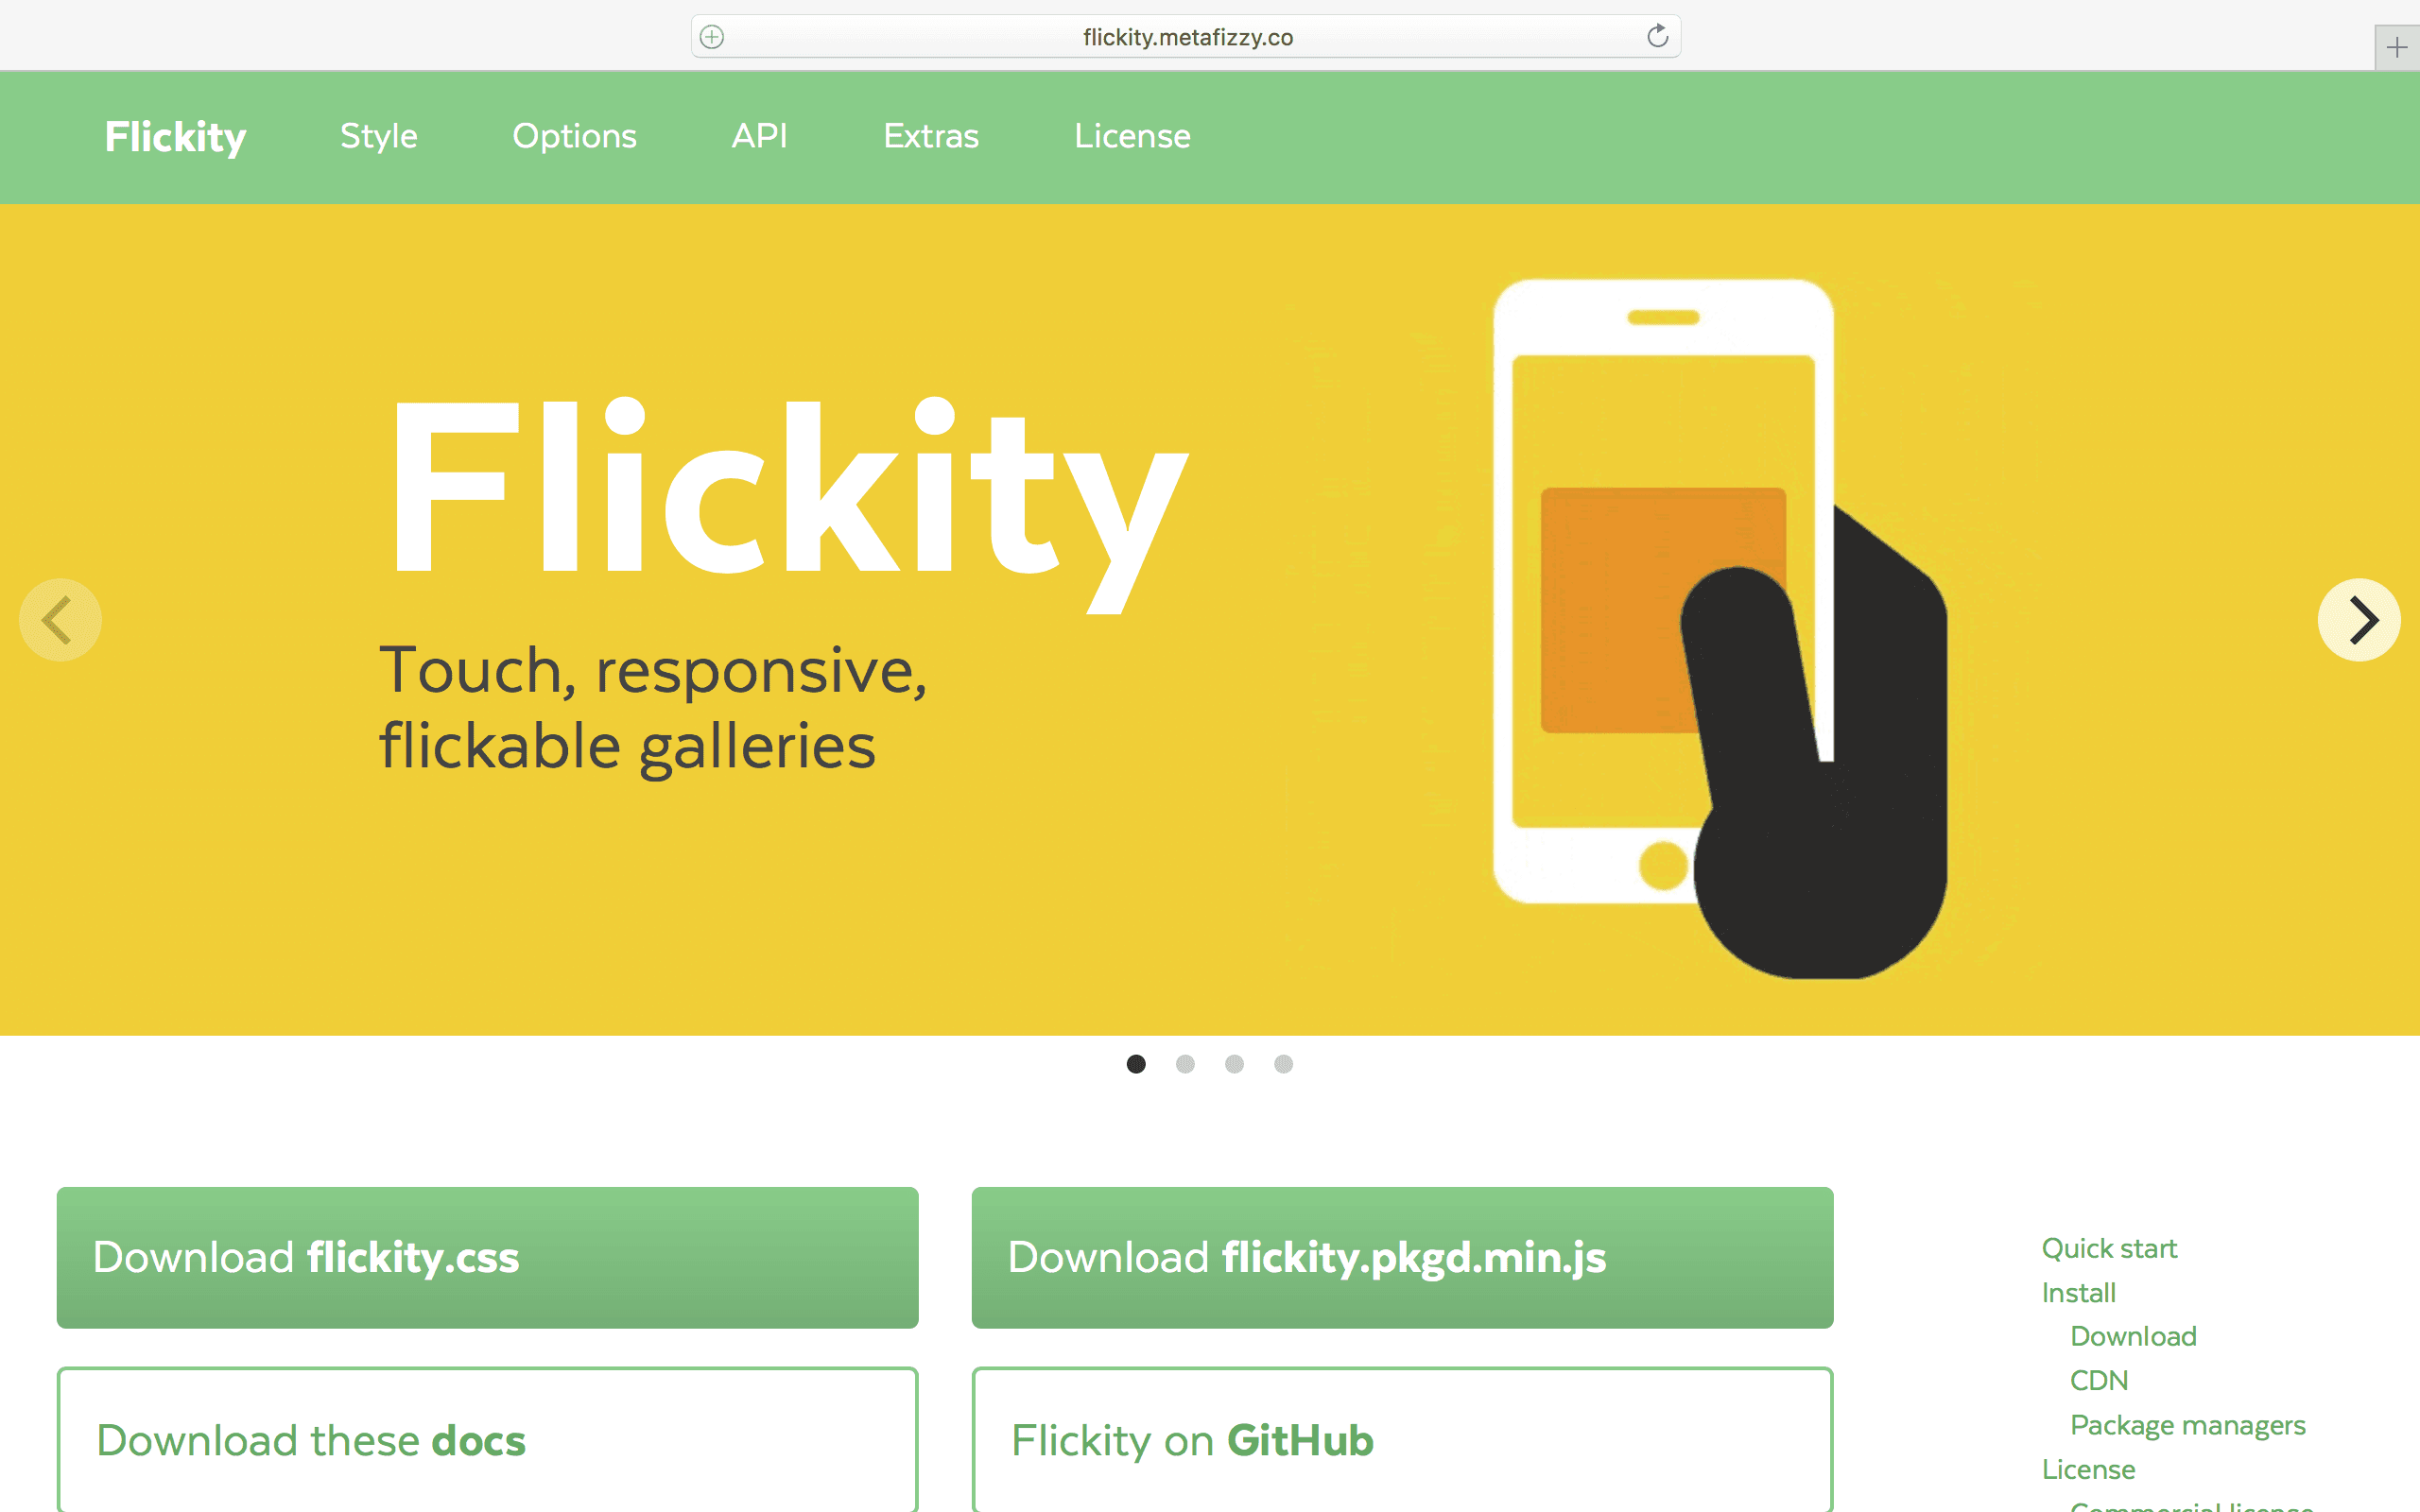 Flickity